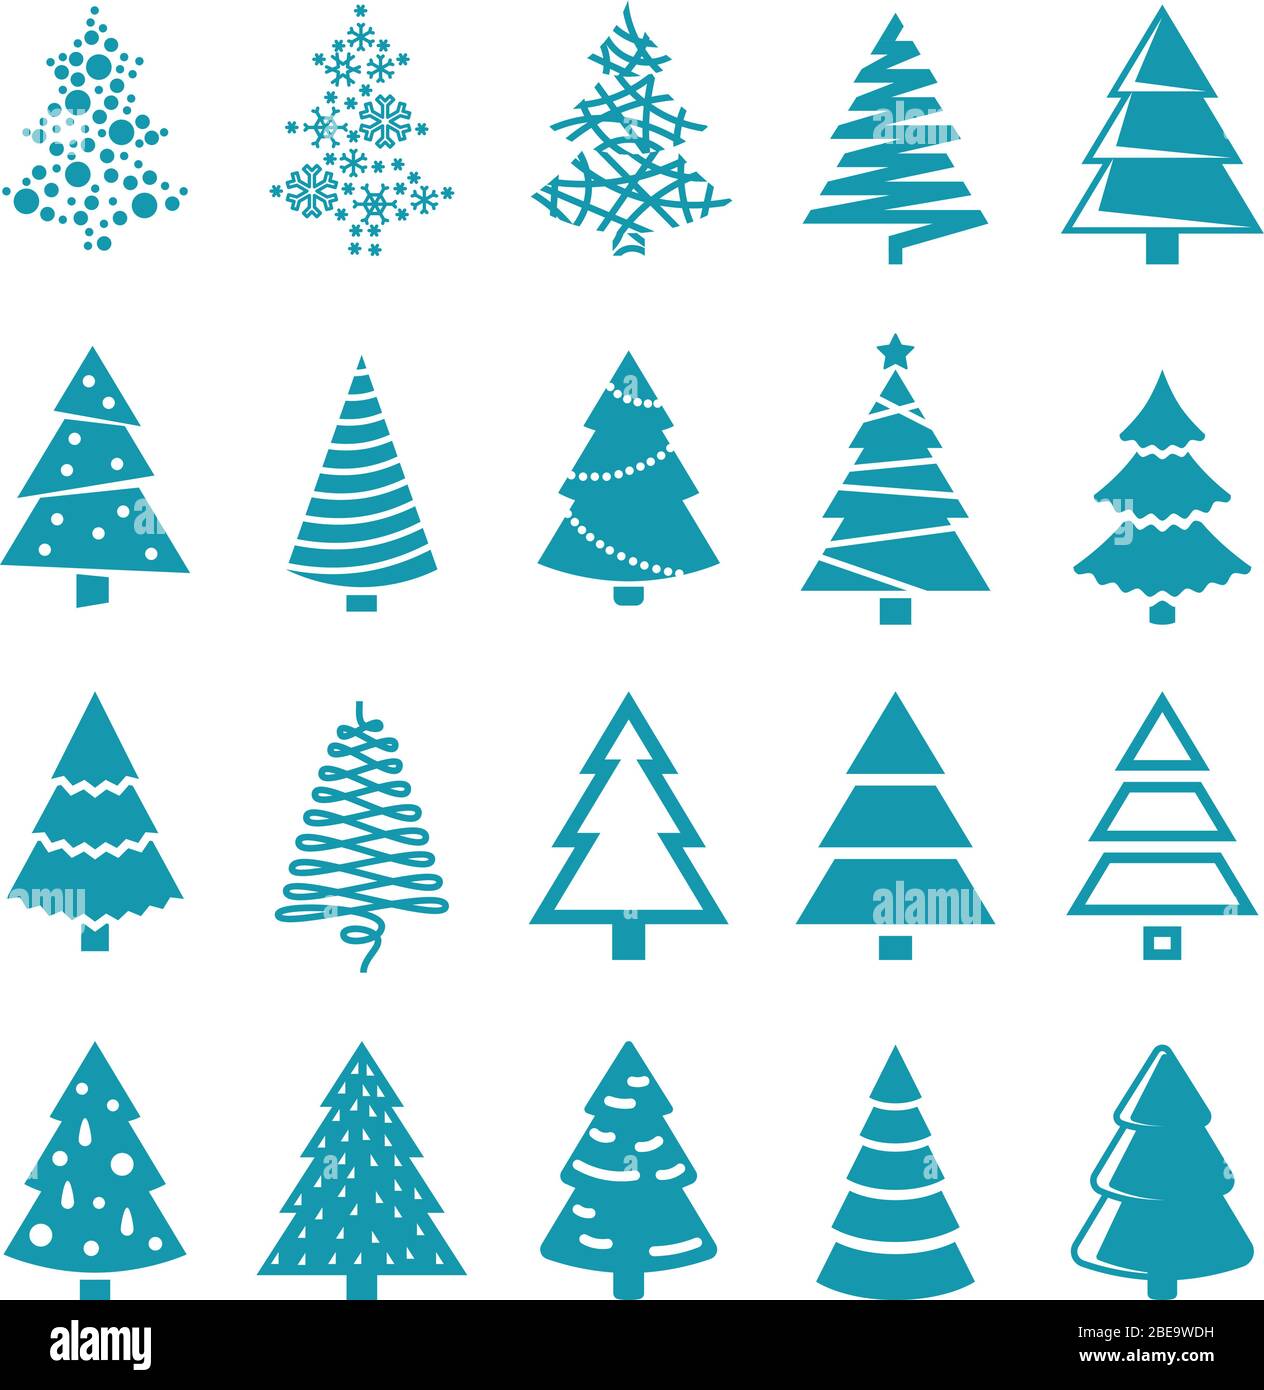 Black silhouette christmas trees vector stylized simple symbols. Set of trees for xmas and new year silhouette monochrome illustration Stock Vector